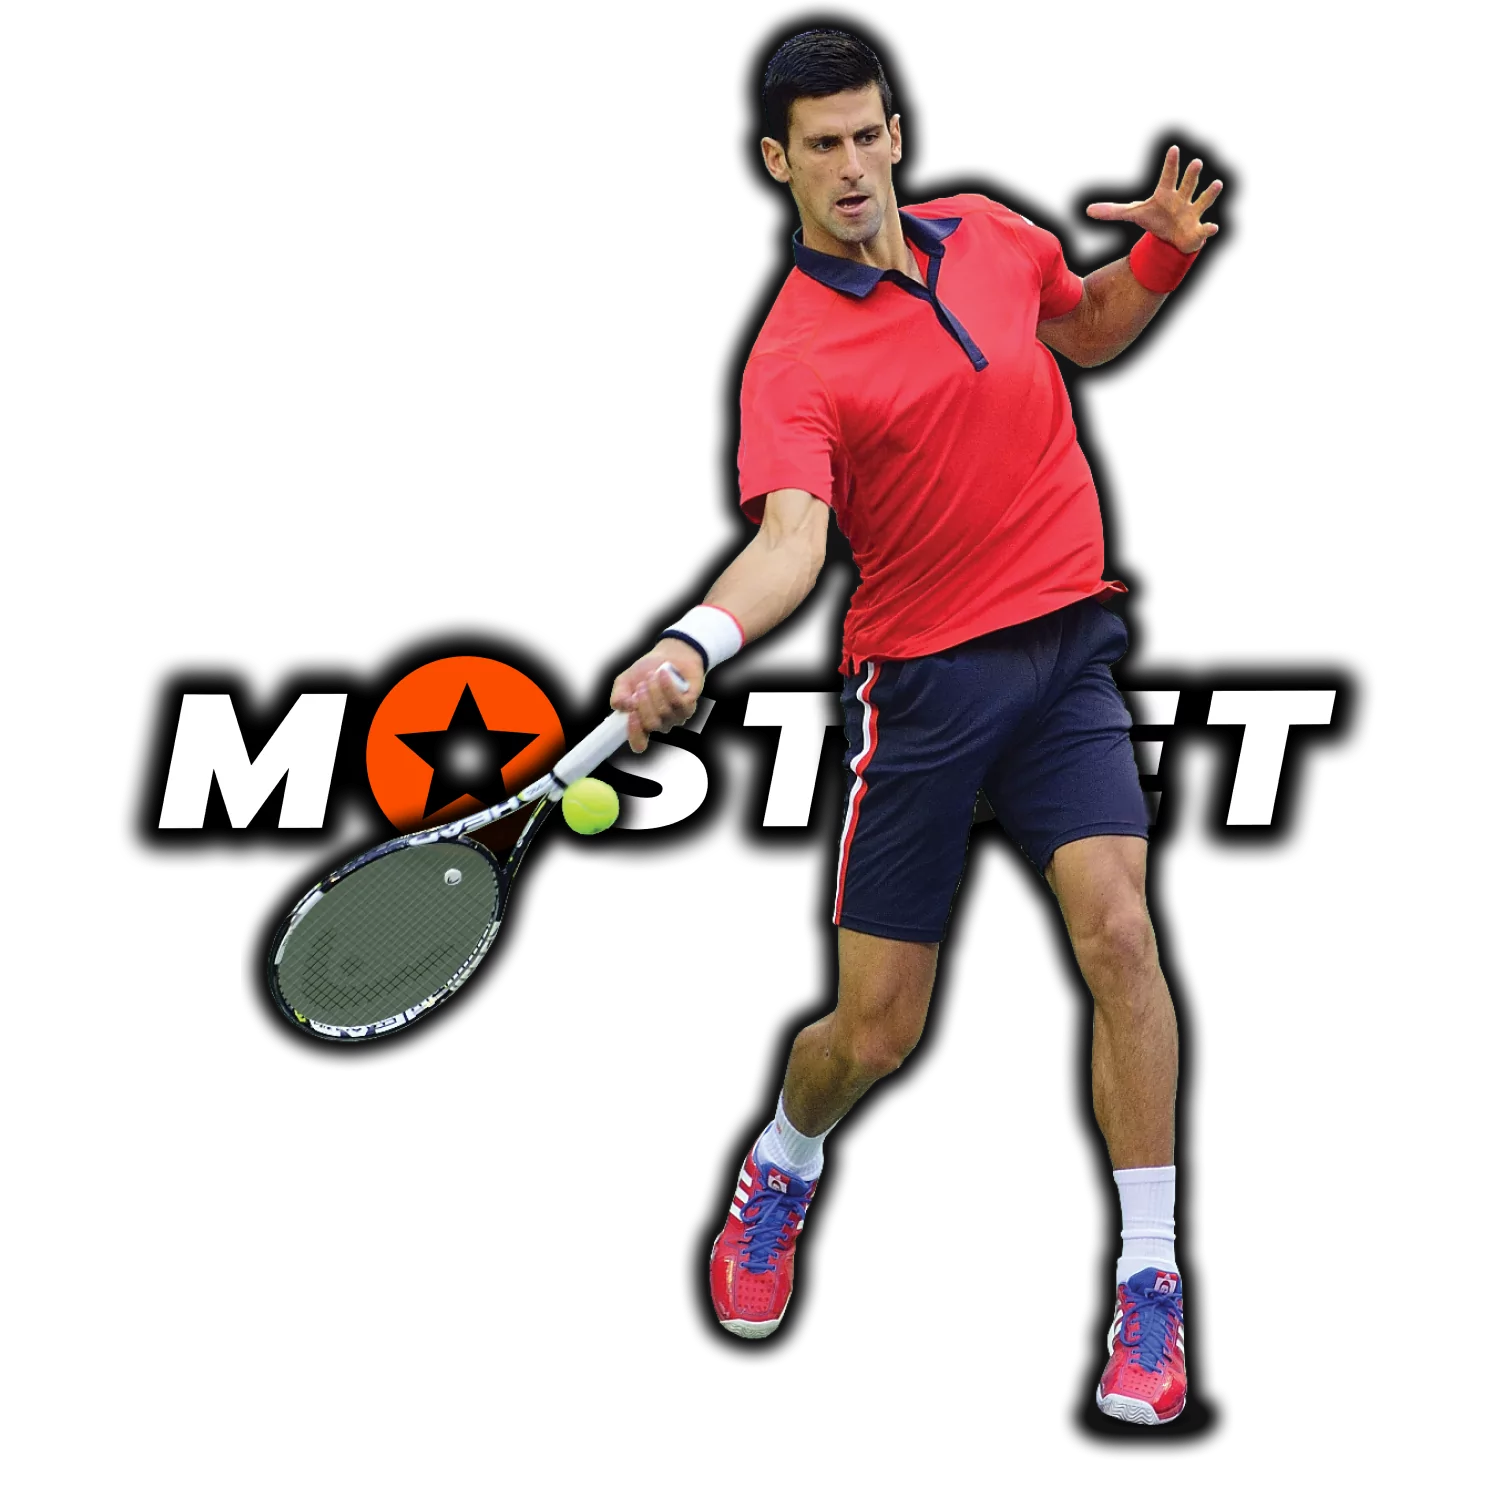 Place your bets on tennis with Mostbet.